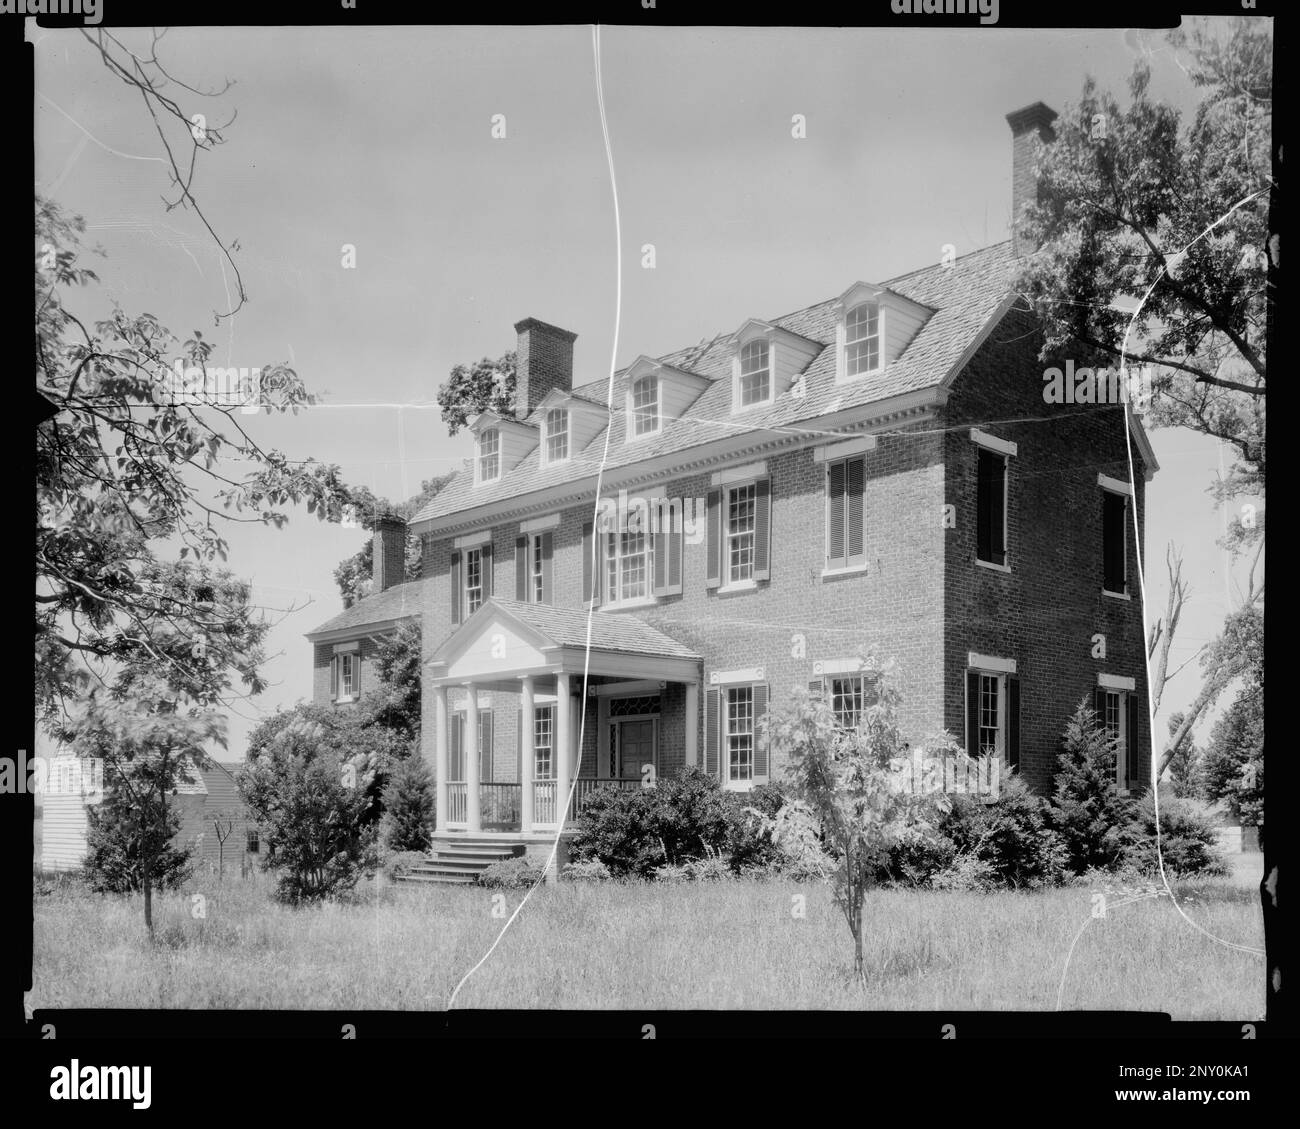 Cessford, Eastville, Northampton County, Virginia. Carnegie Survey of the Architecture of the South. United States  Virginia  Northampton County  Eastville, Porches, Dormers, Houses. Stock Photo